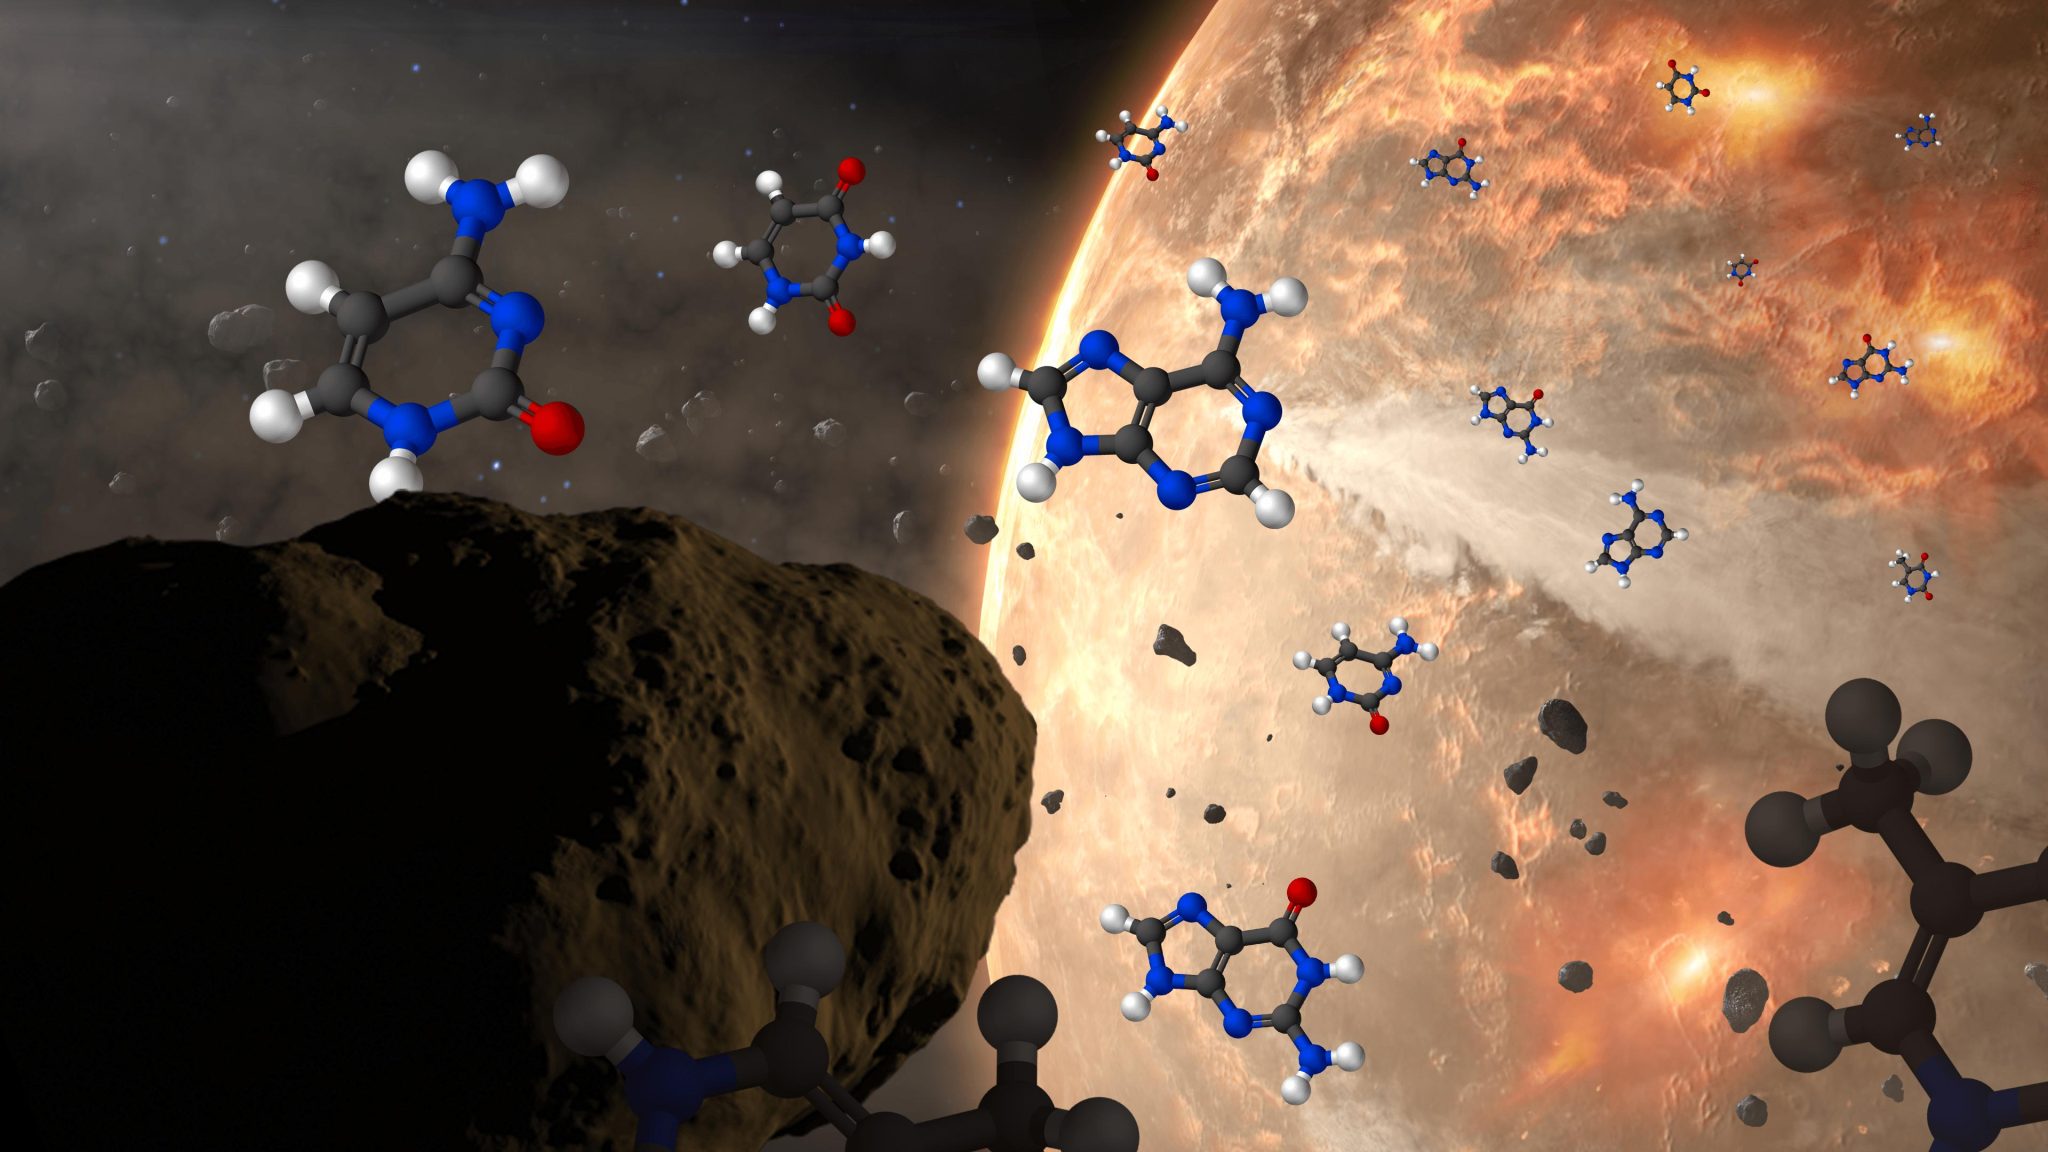 Meteorites transport nuclear bases to ancient Earth